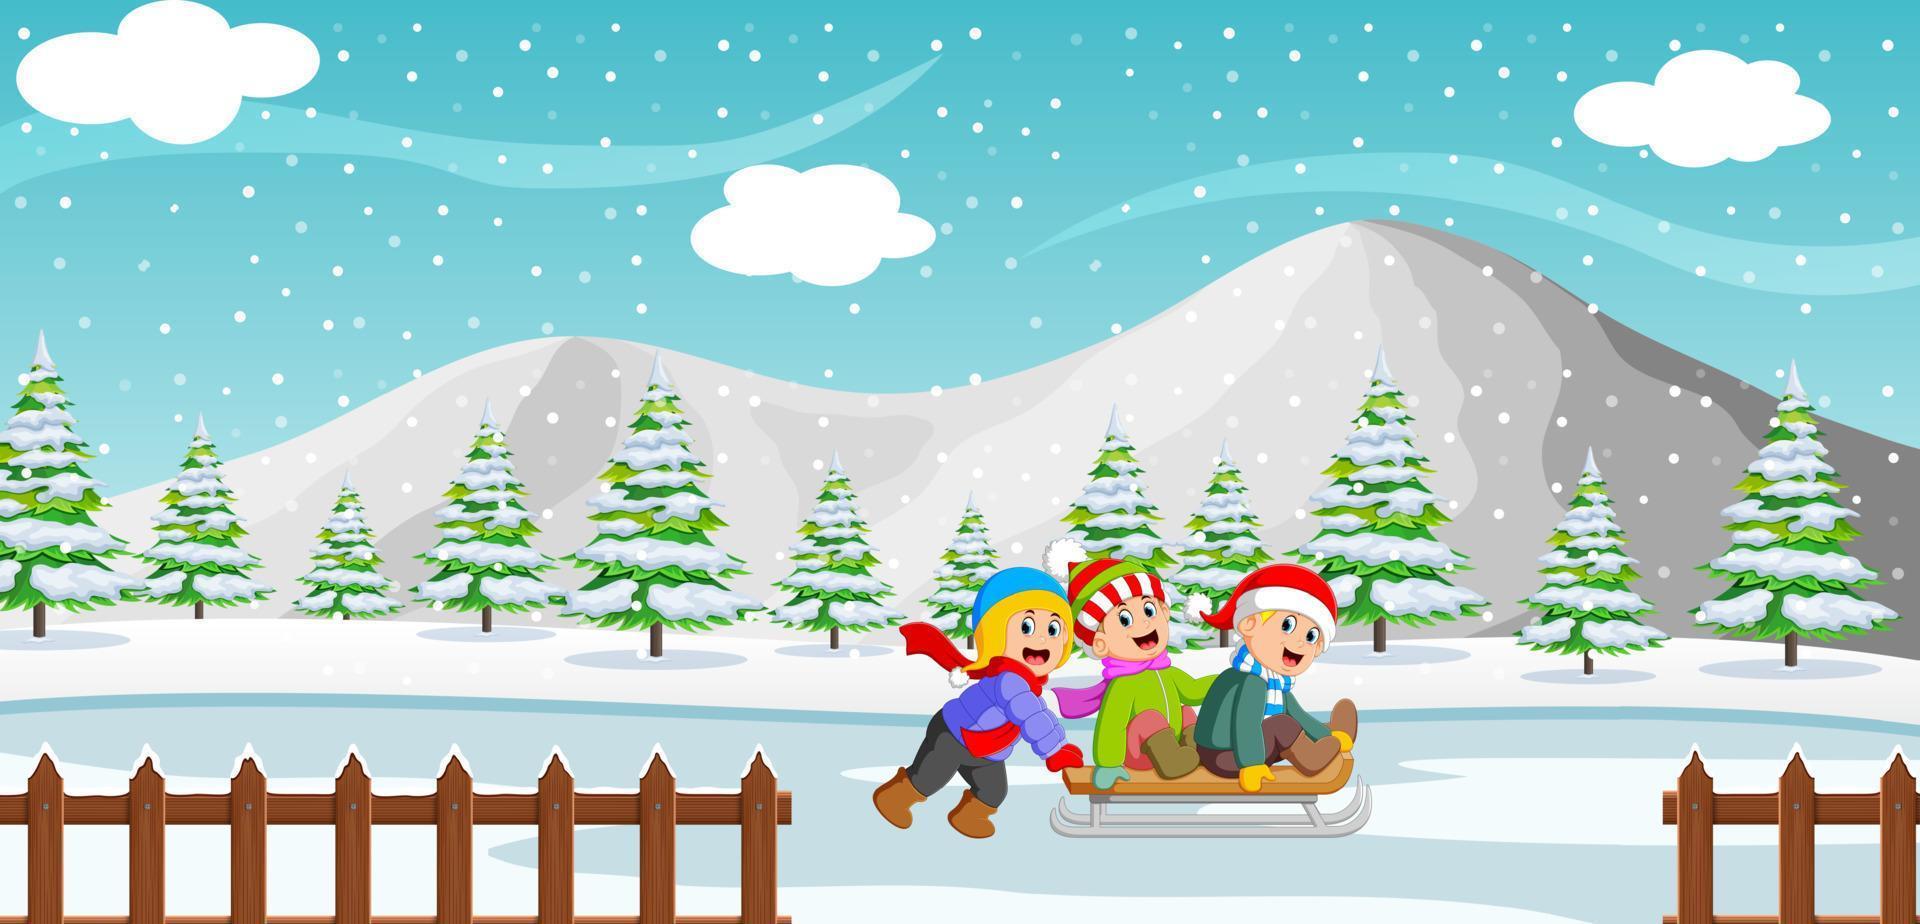 Happy Kids playing a sleigh ride in winter with mountain background vector